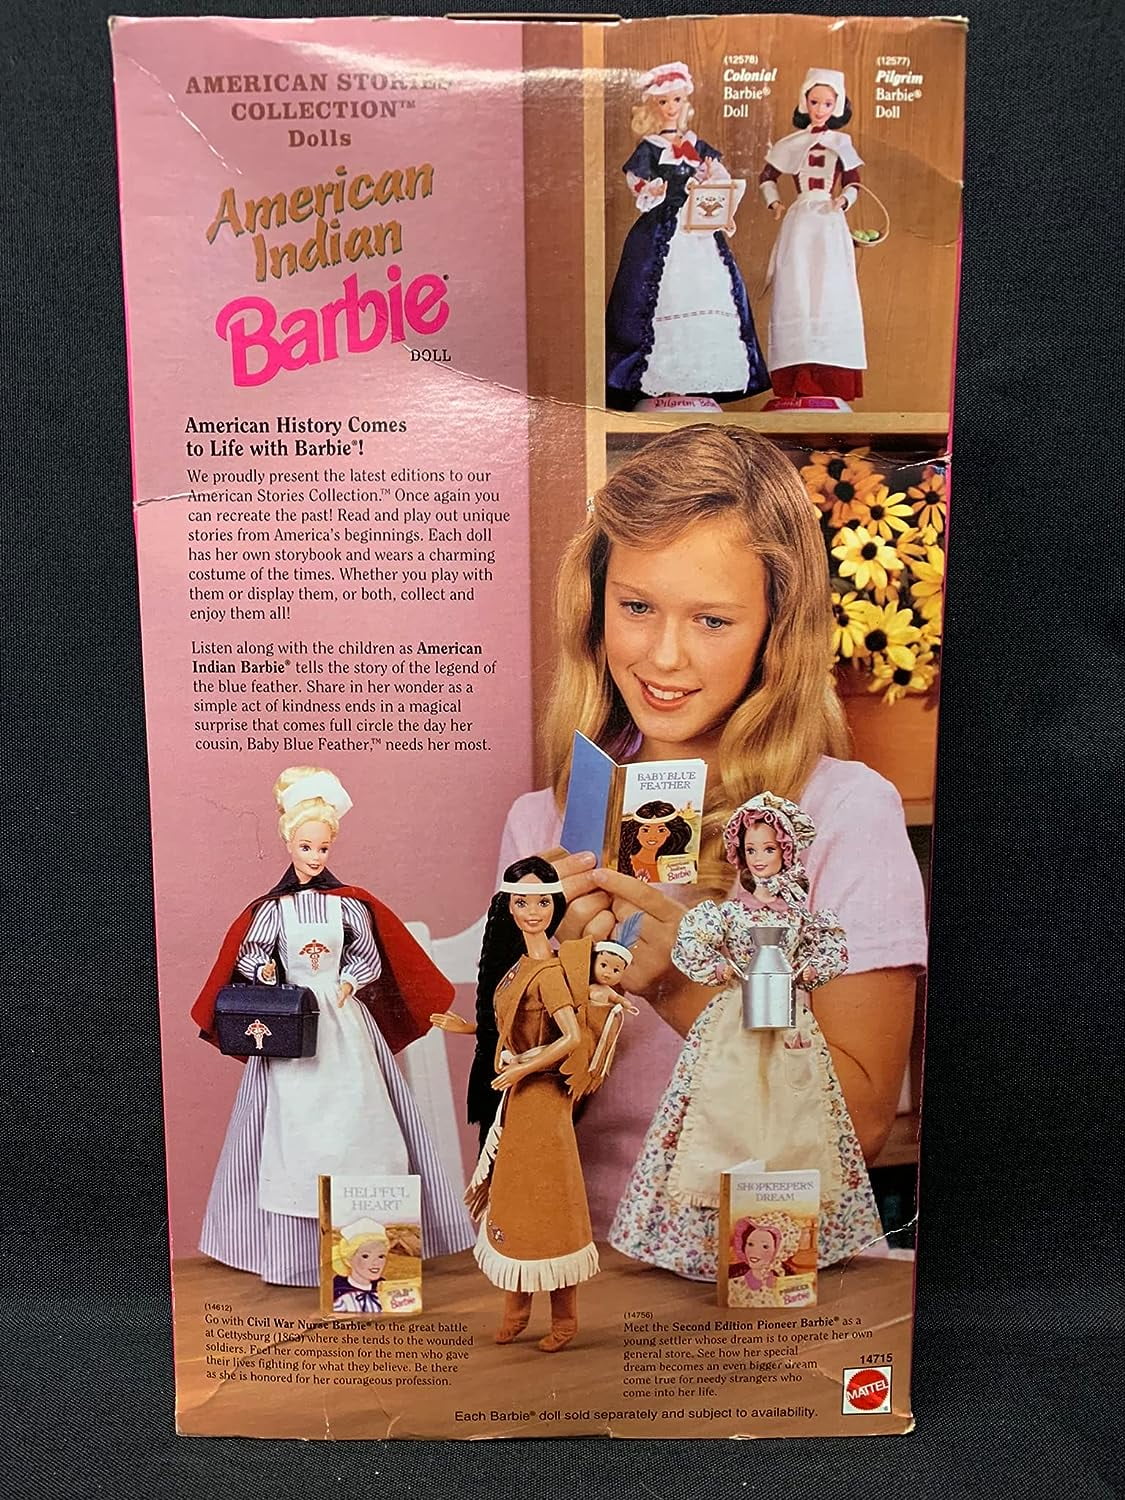 Barbie Collector Edition American Stories Collection Second